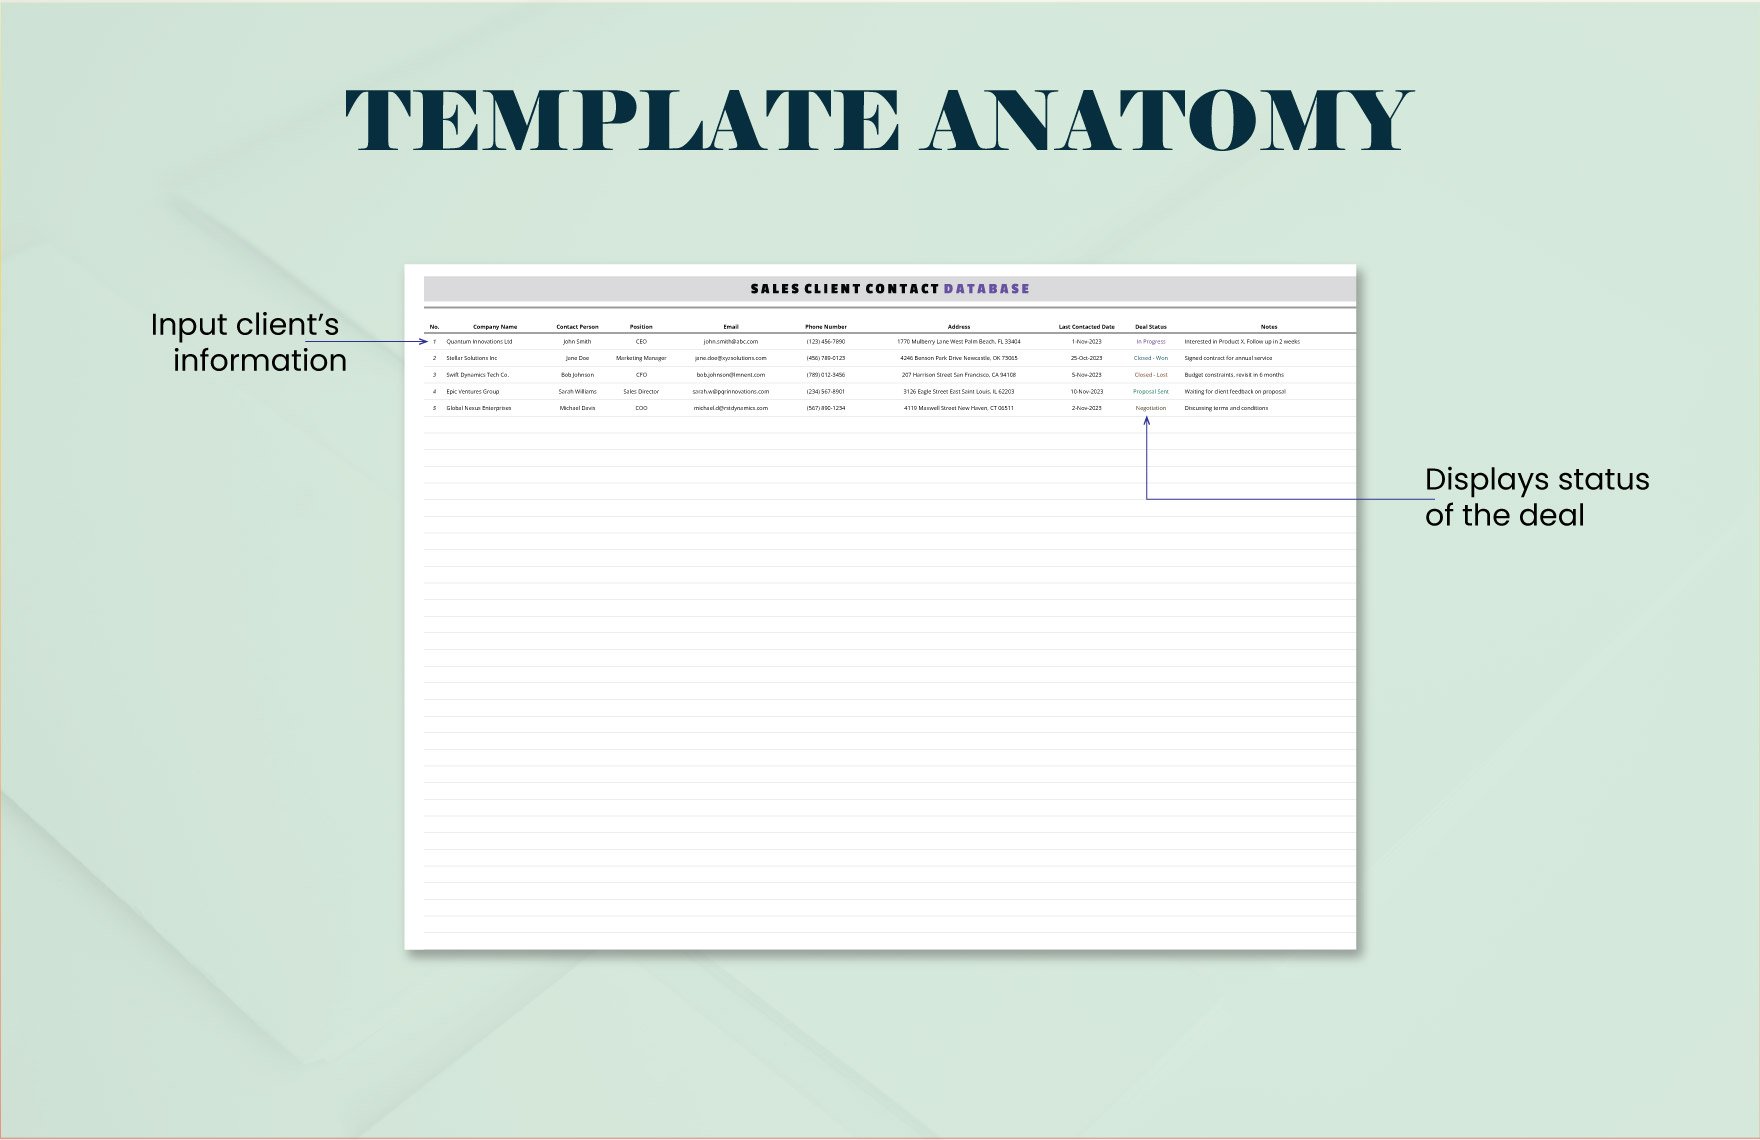 Sales Client Contact Database Template